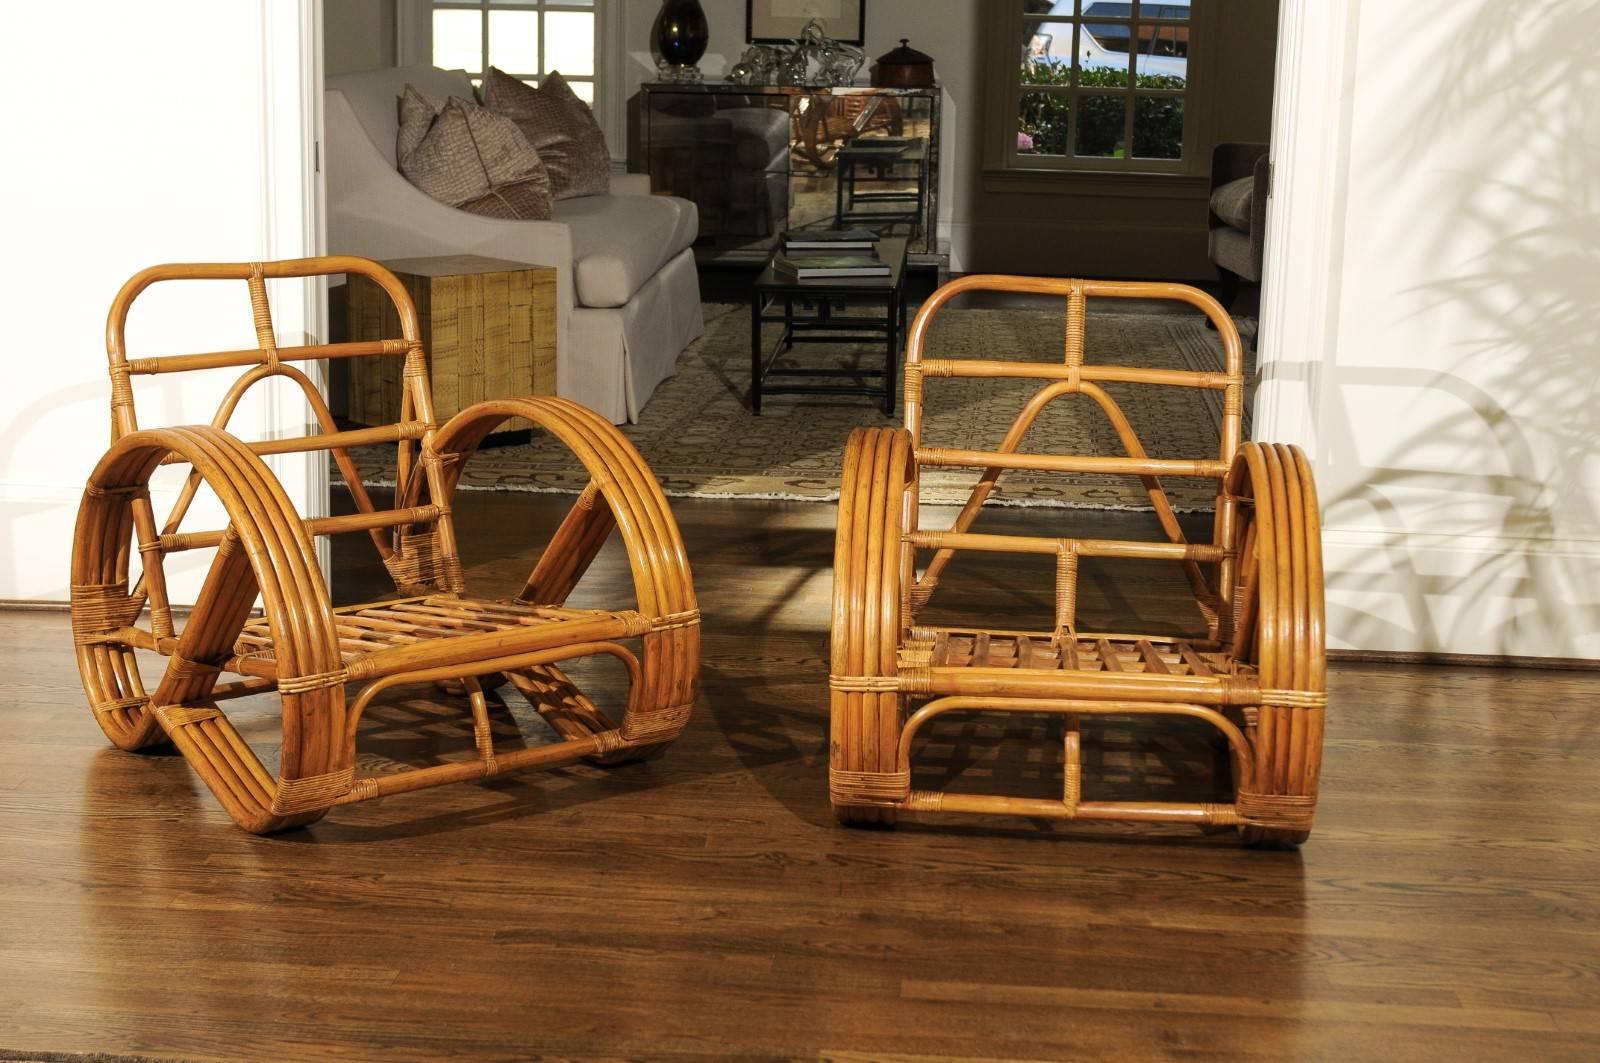 An exquisite pair of rattan round Pretzel lounge chairs, circa 1950. Stout, sturdy and expertly made pieces intended for heavy regular use. Stunning craftsmanship and quality. Exceptional room defining pieces aged to absolute perfection. The